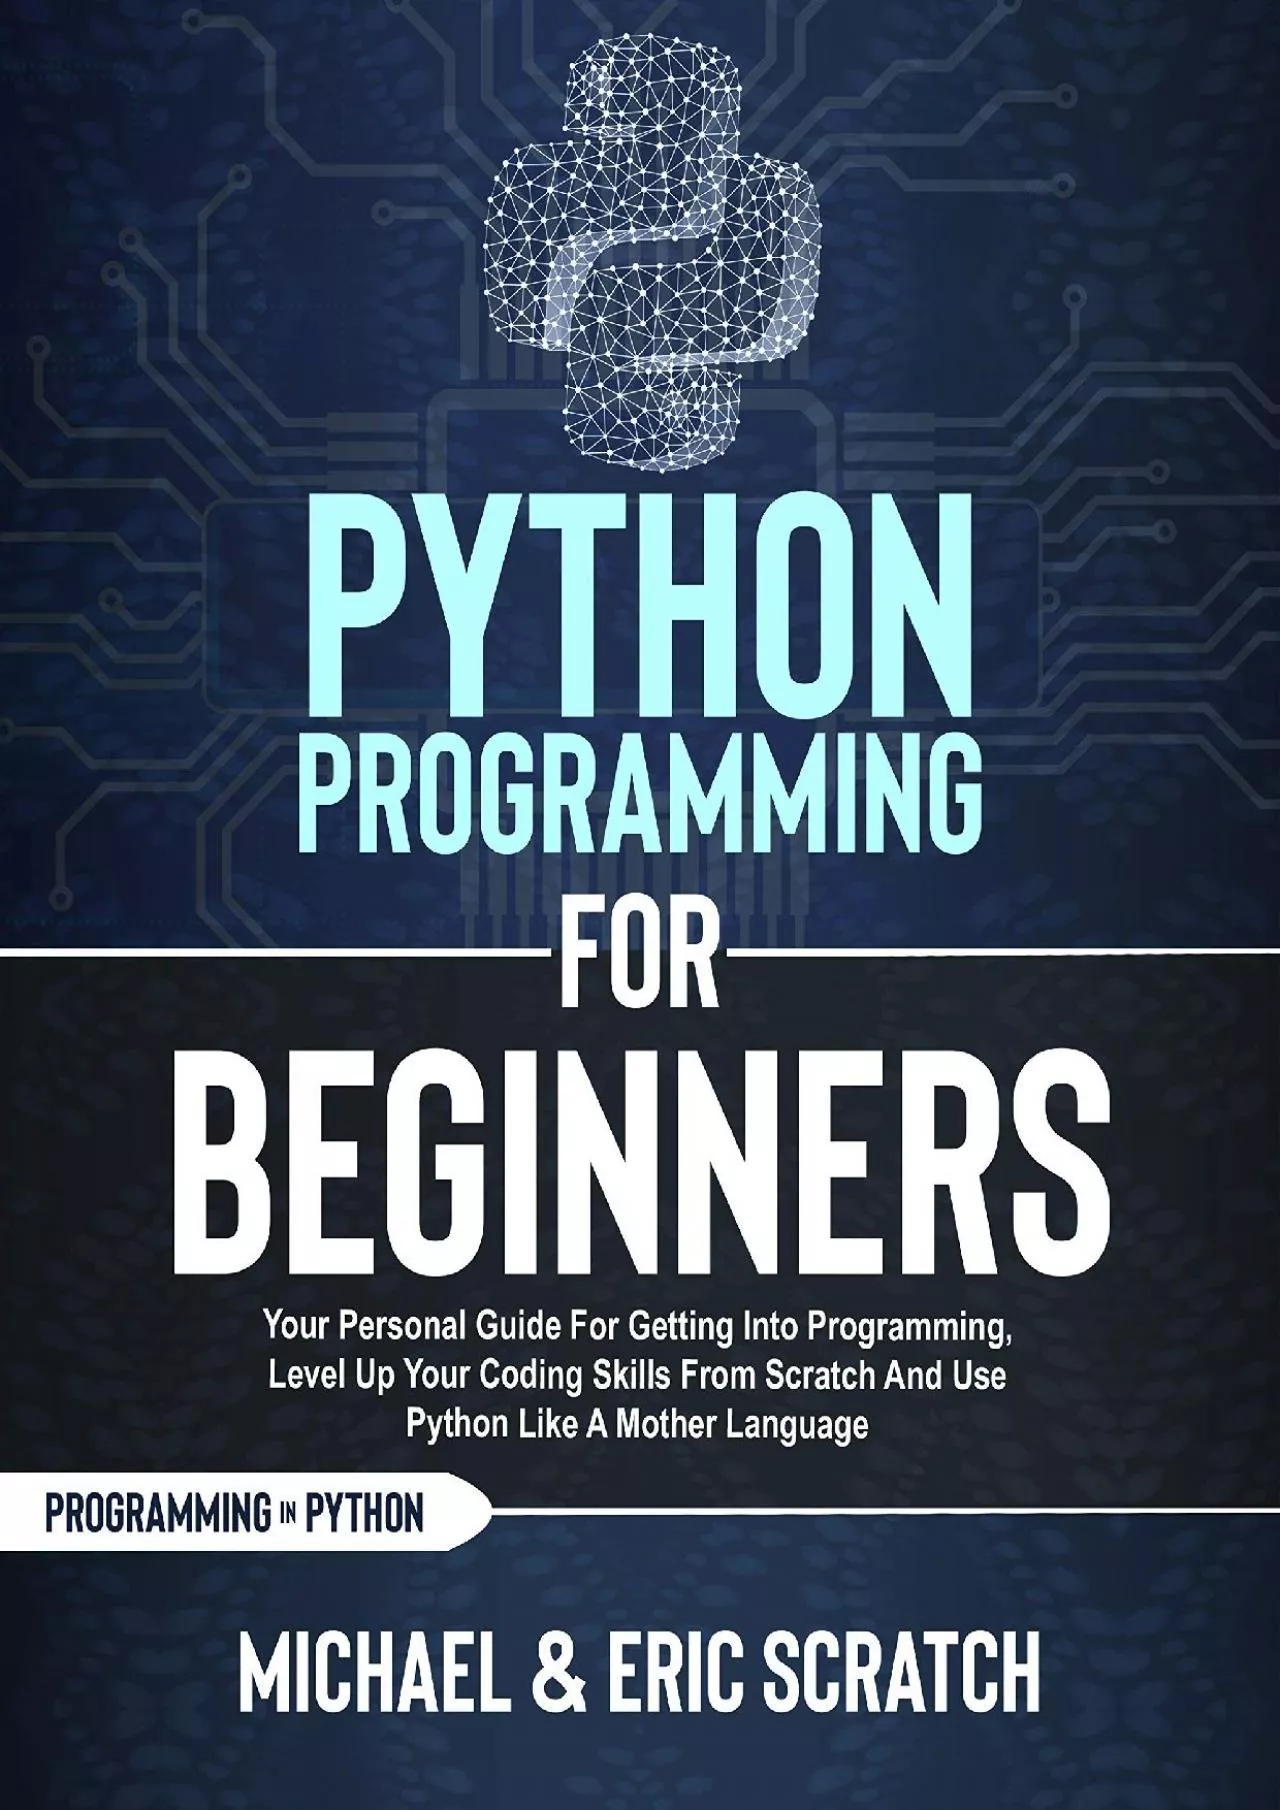 [FREE]-PYTHON PROGRAMMING FOR BEGINNERS Your Personal Guide for Getting into Programming,